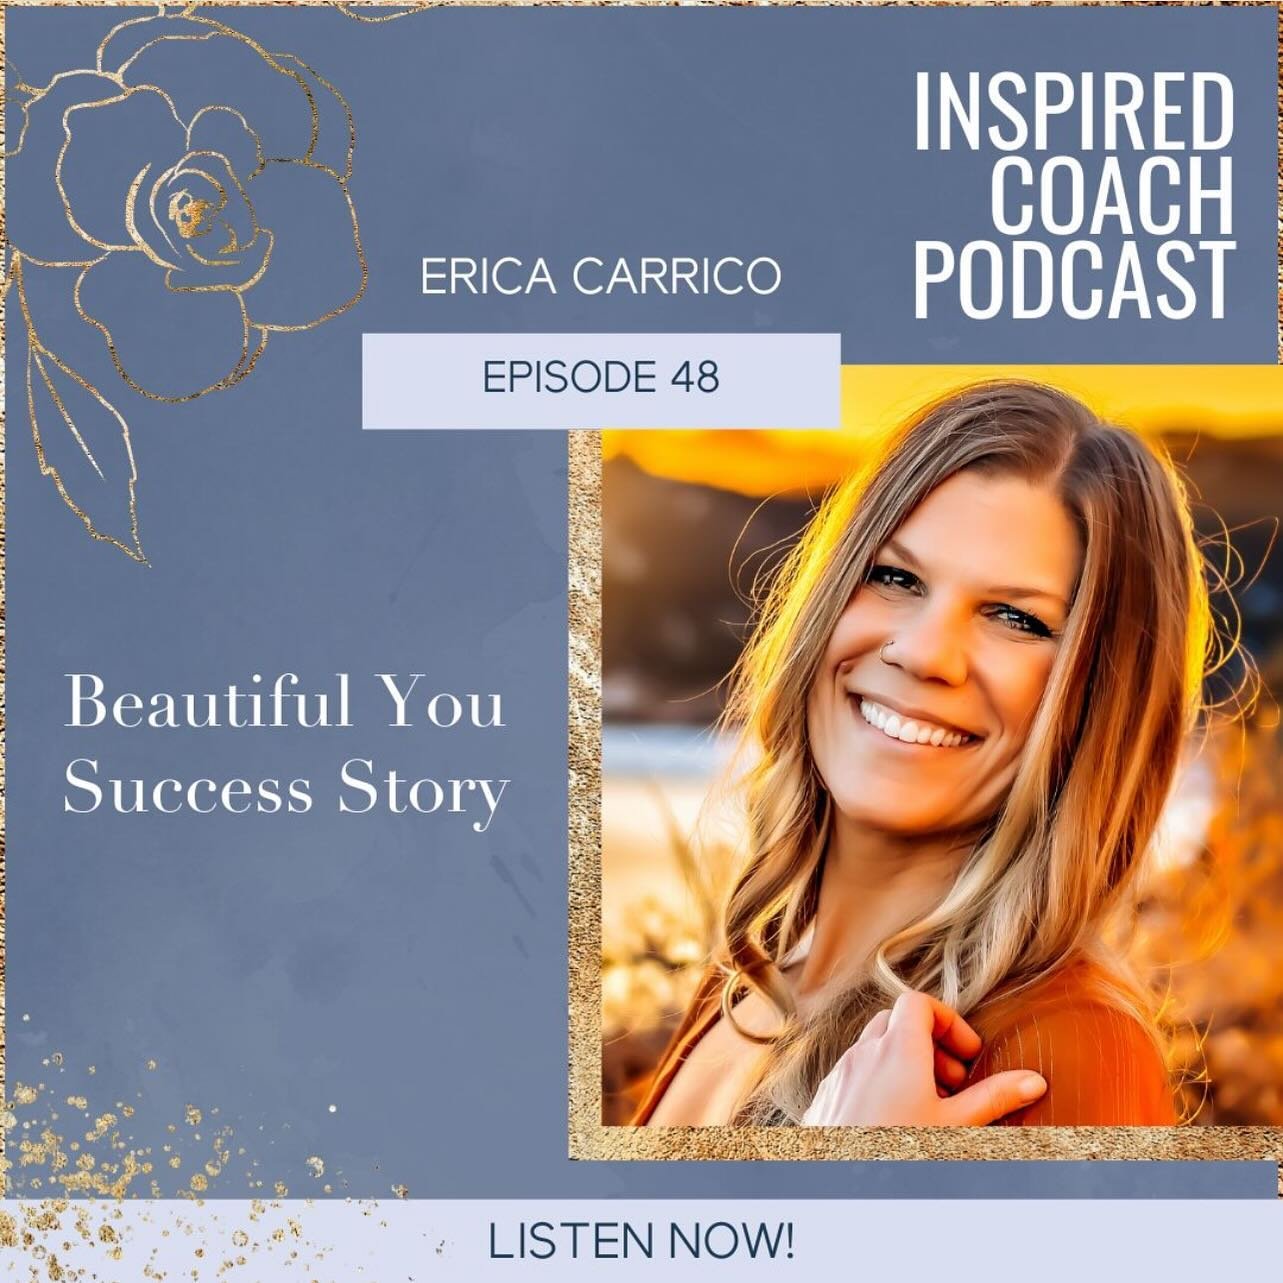 What an honor to be interviewed on the Inspired Coach Podcast, by the woman whose course changed my life in so many ways, Julie Parker (@julesyparker), the Founder of the Beautiful You Coaching Academy (@bycacademy) 

My journey was far from easy, bu